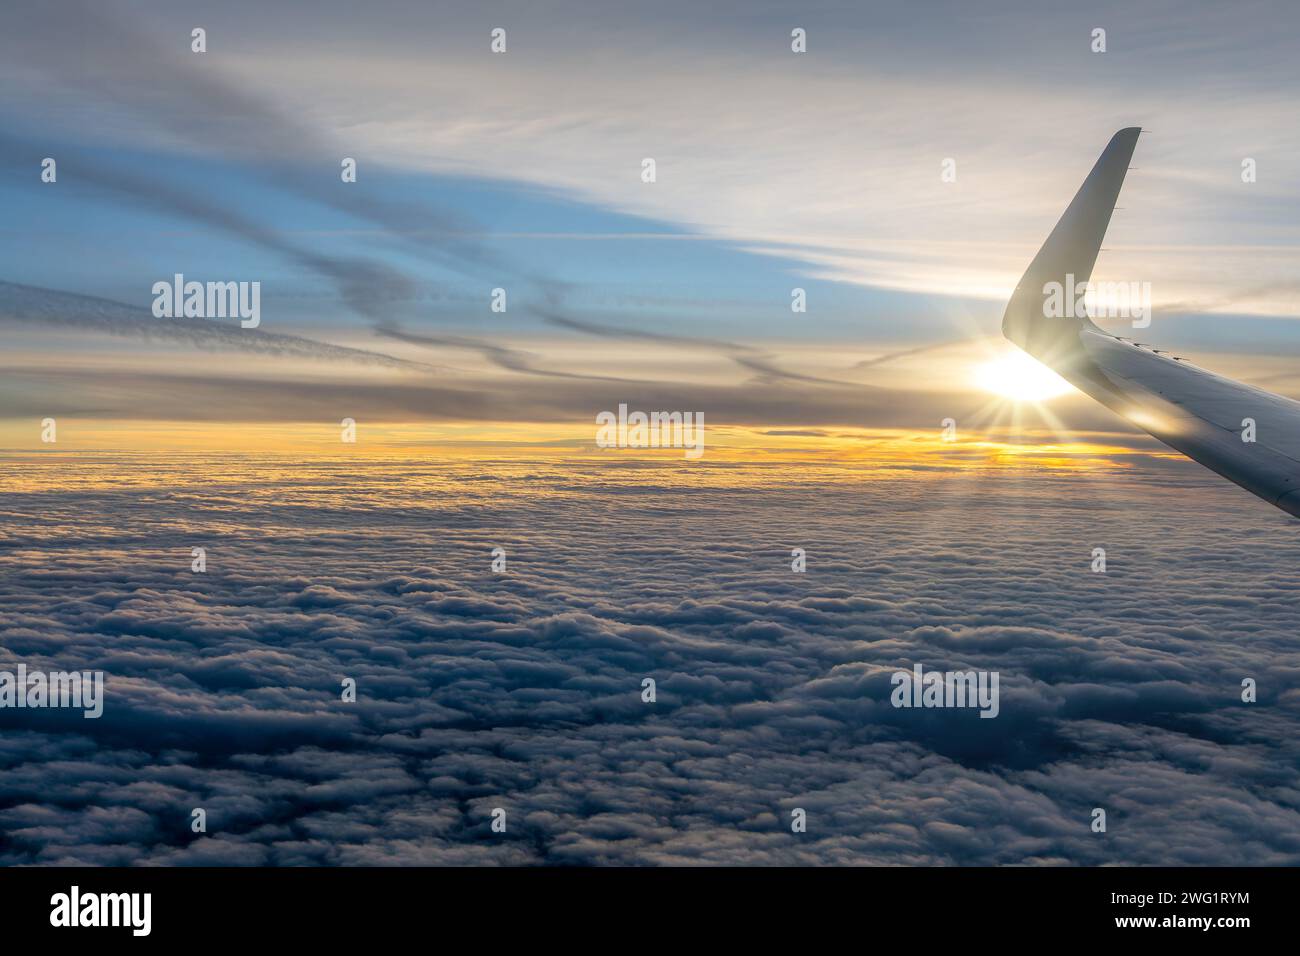 View from an airplane window over a sea of clouds at sunset with the plane wing Stock Photo